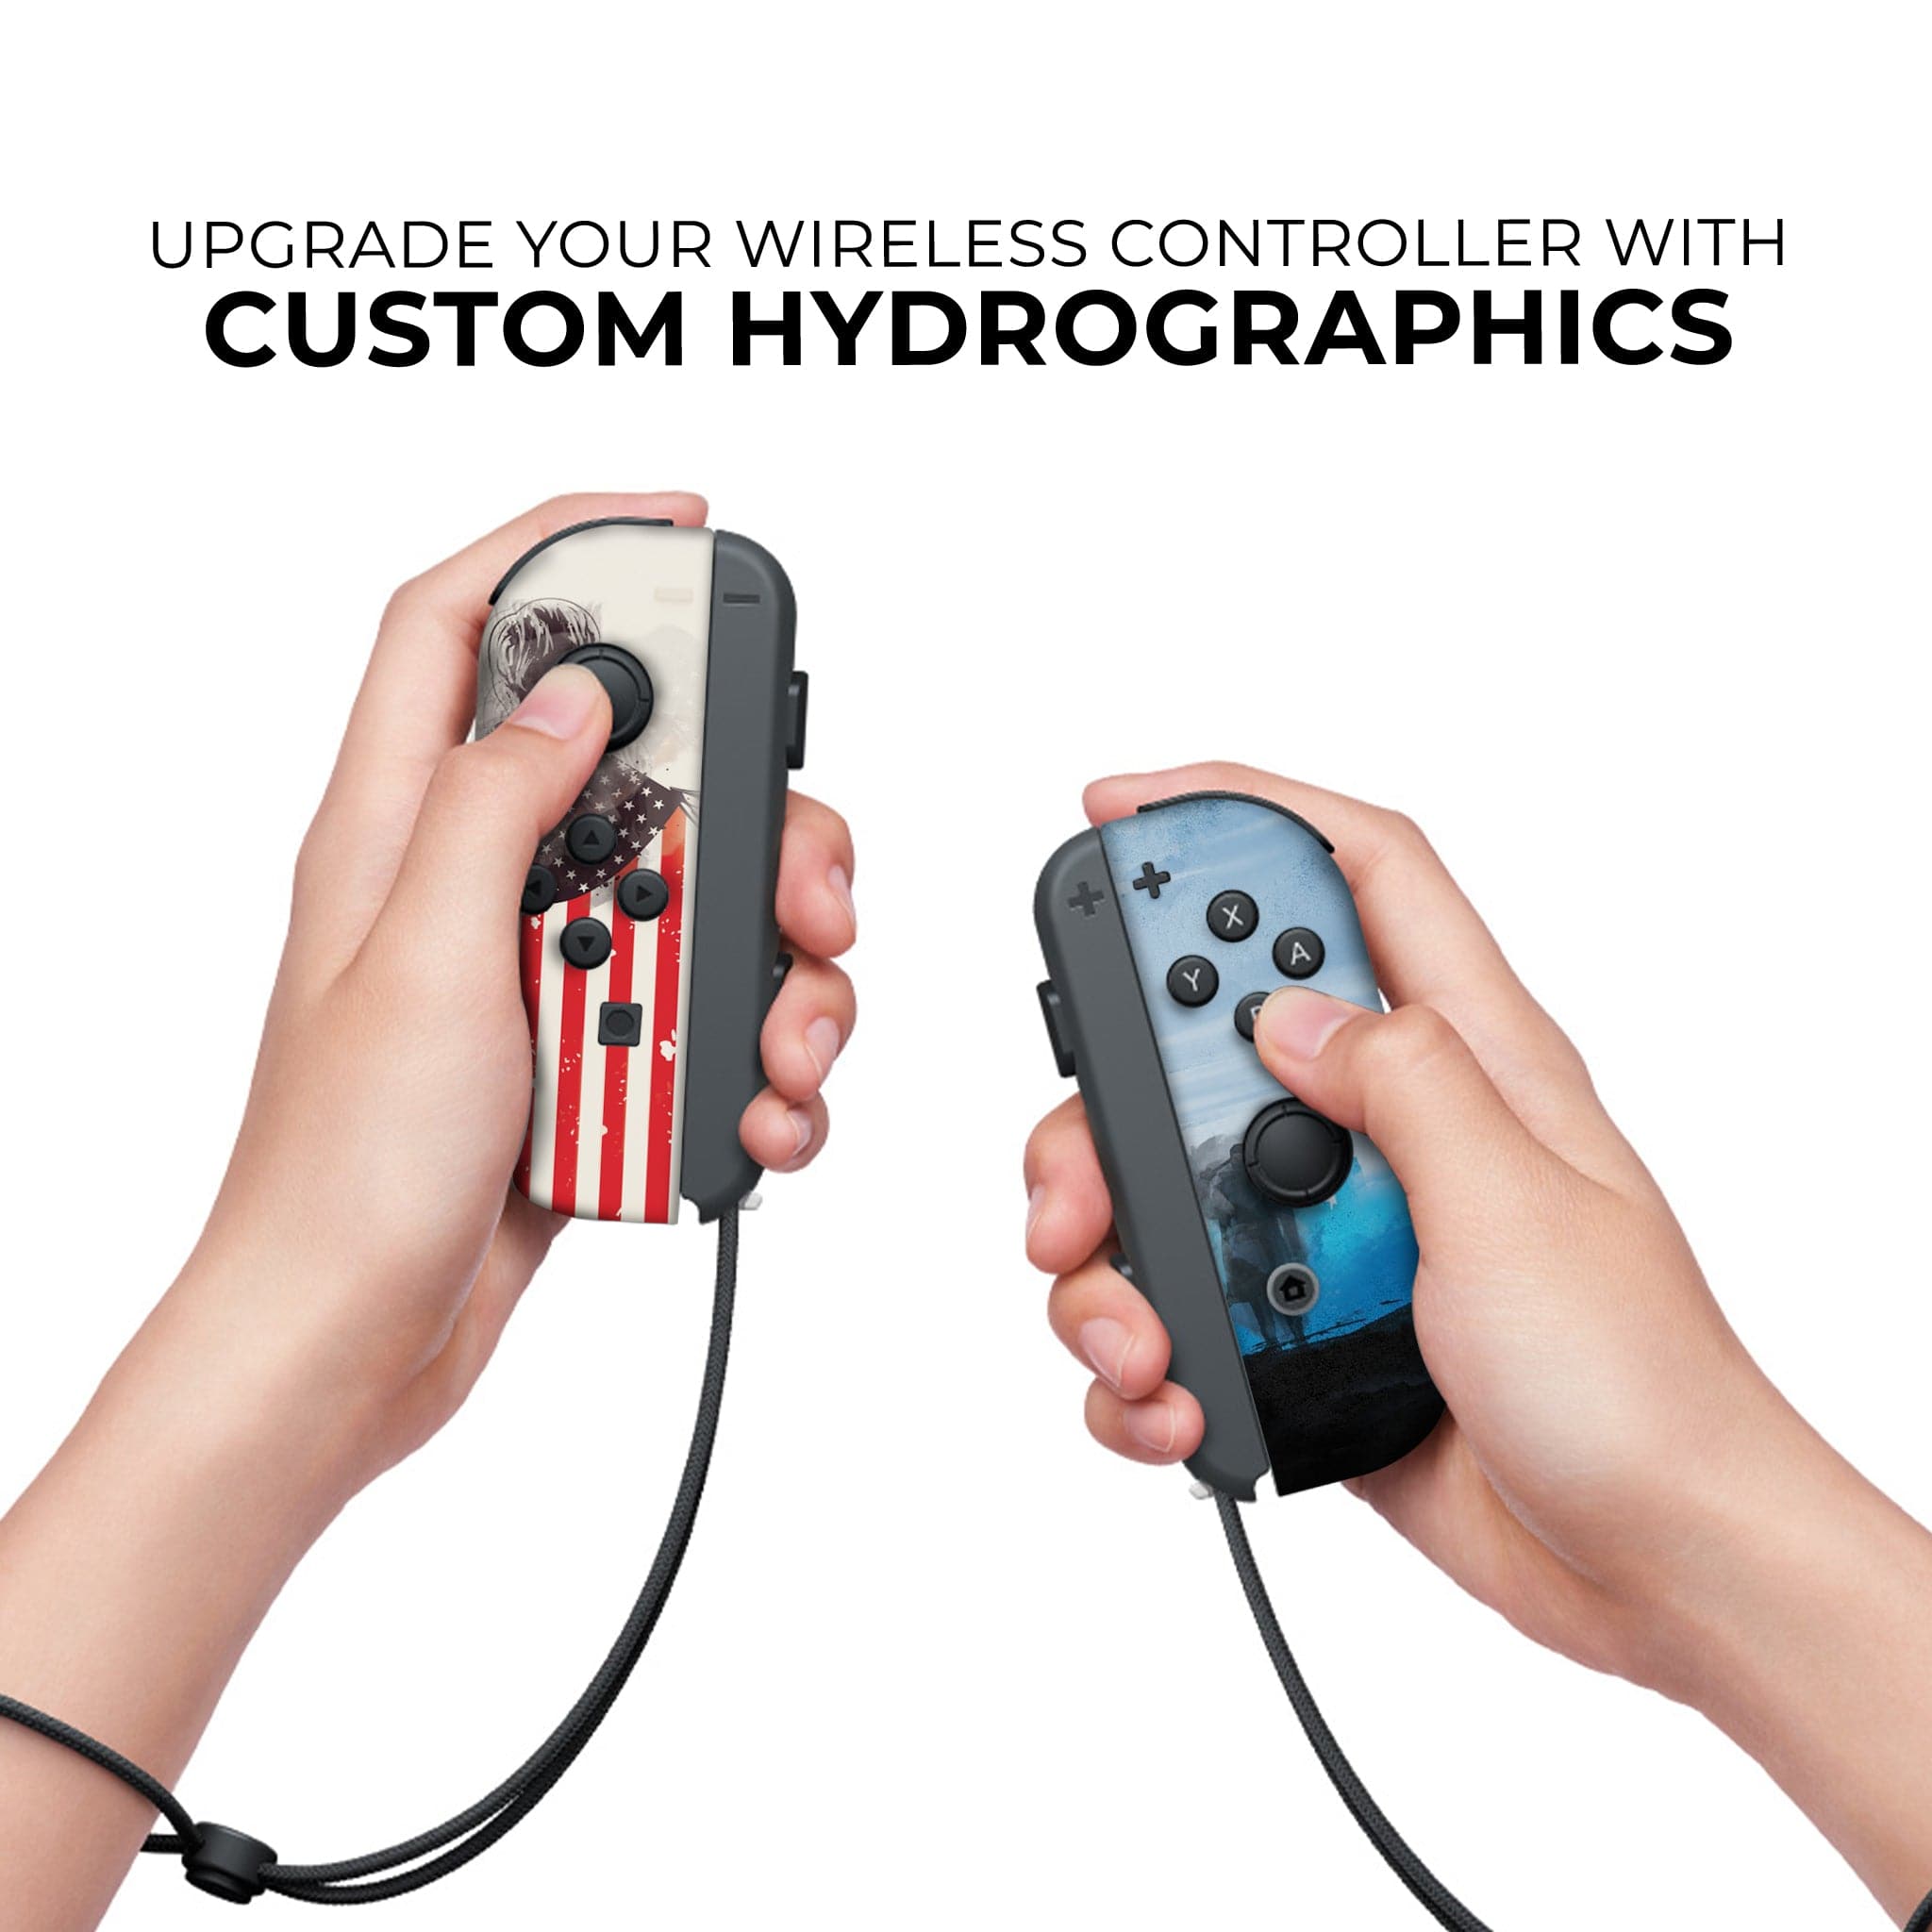 The Boys Inspired Nintendo Switch Joy-Con Left and Right Switch Controllers